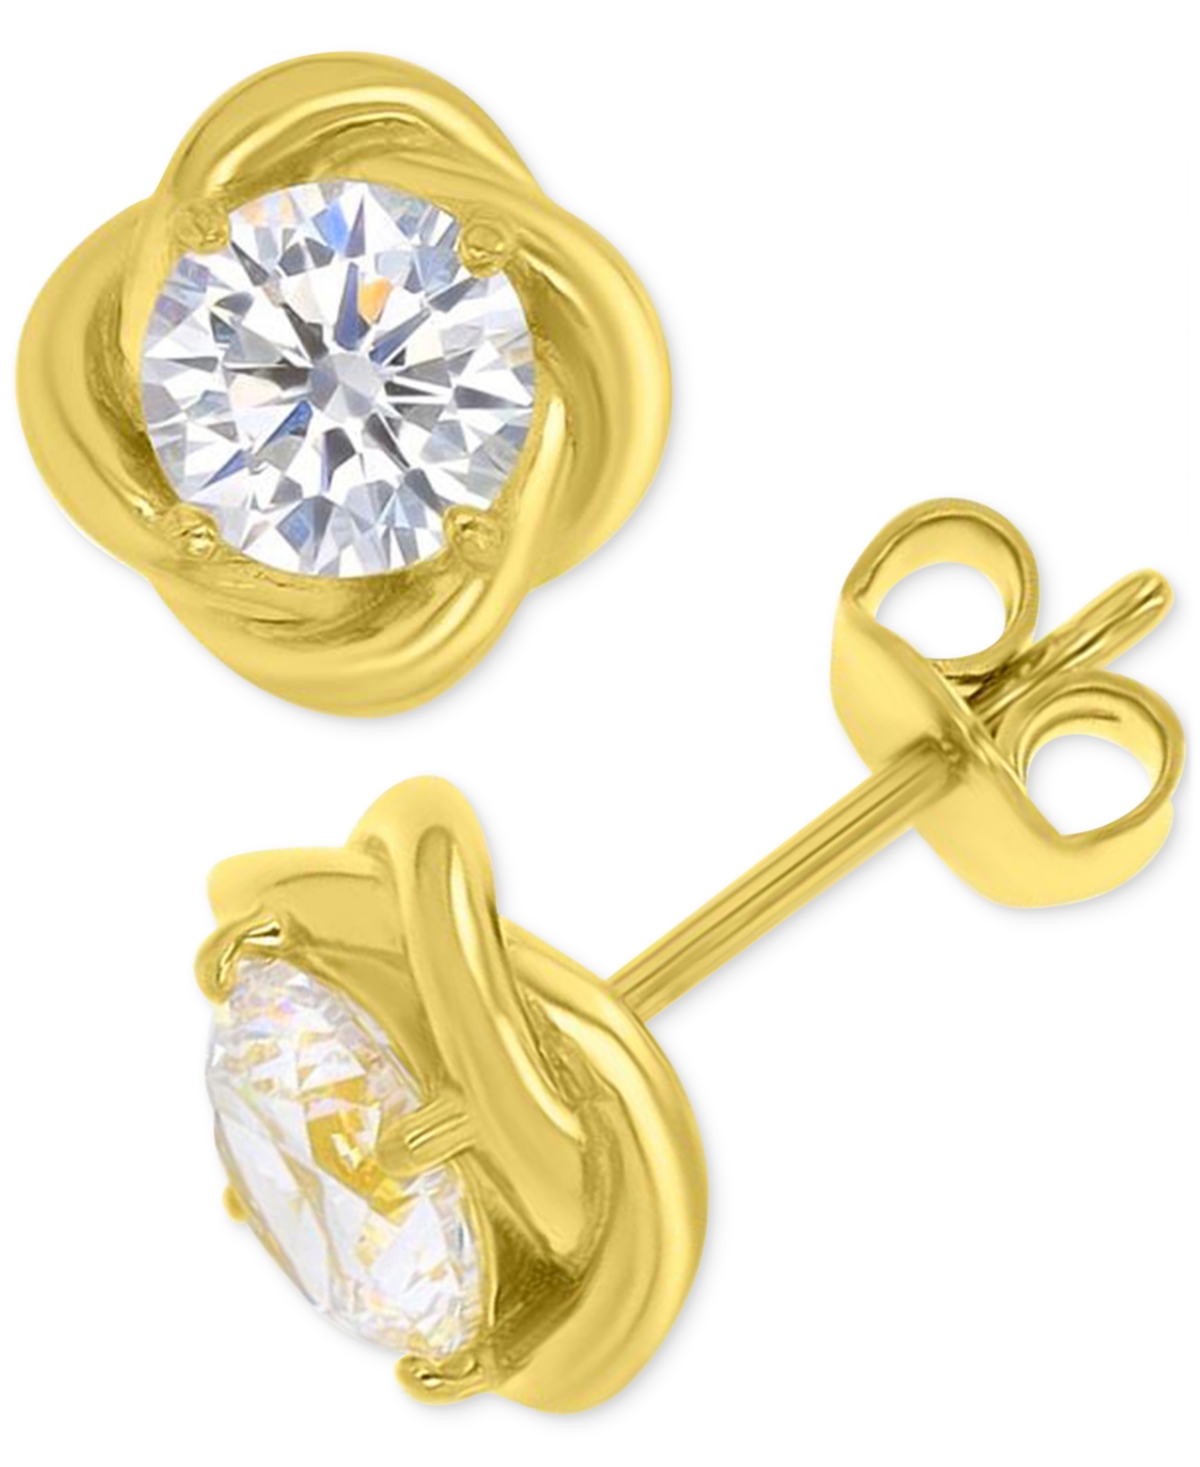 Cubic Zirconia Solitaire Love Knot Frame Stud Earrings - Gold